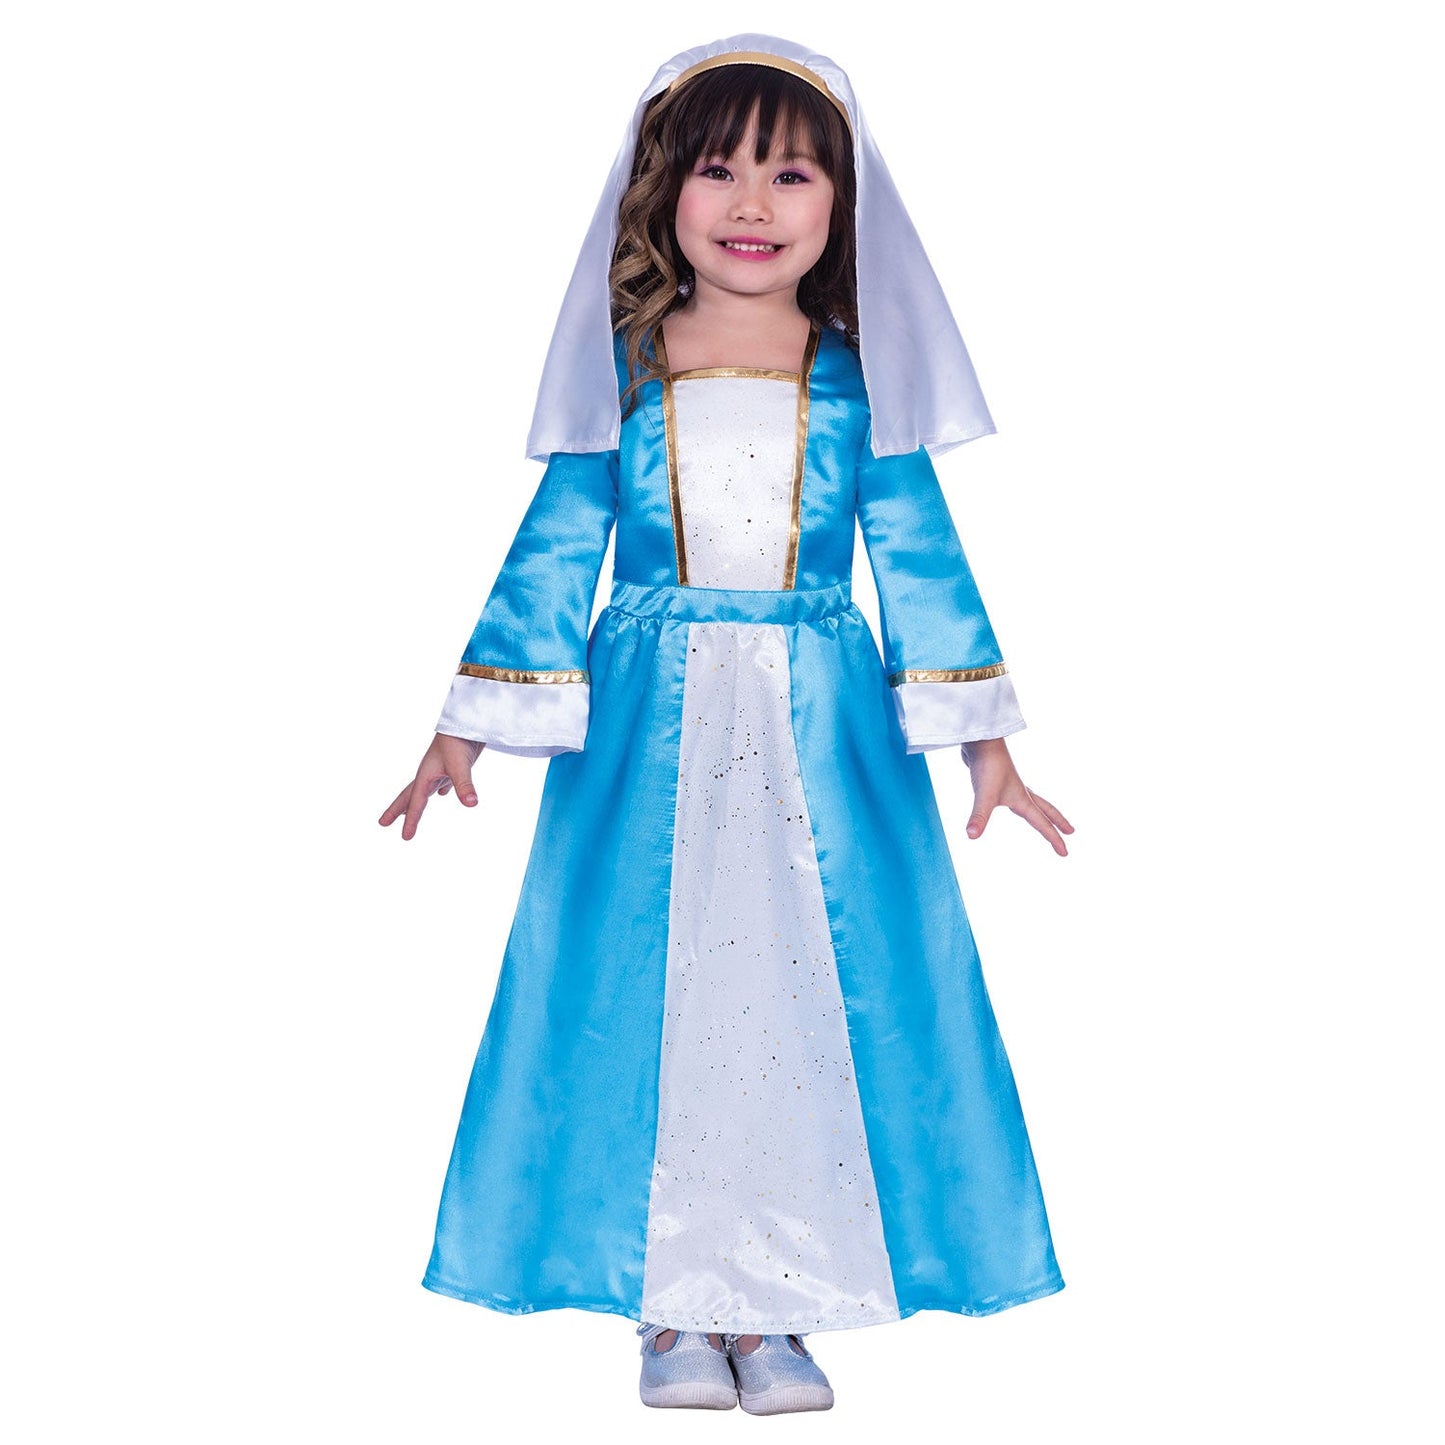 Child Nativity Mary Costume includes dress and headpiece